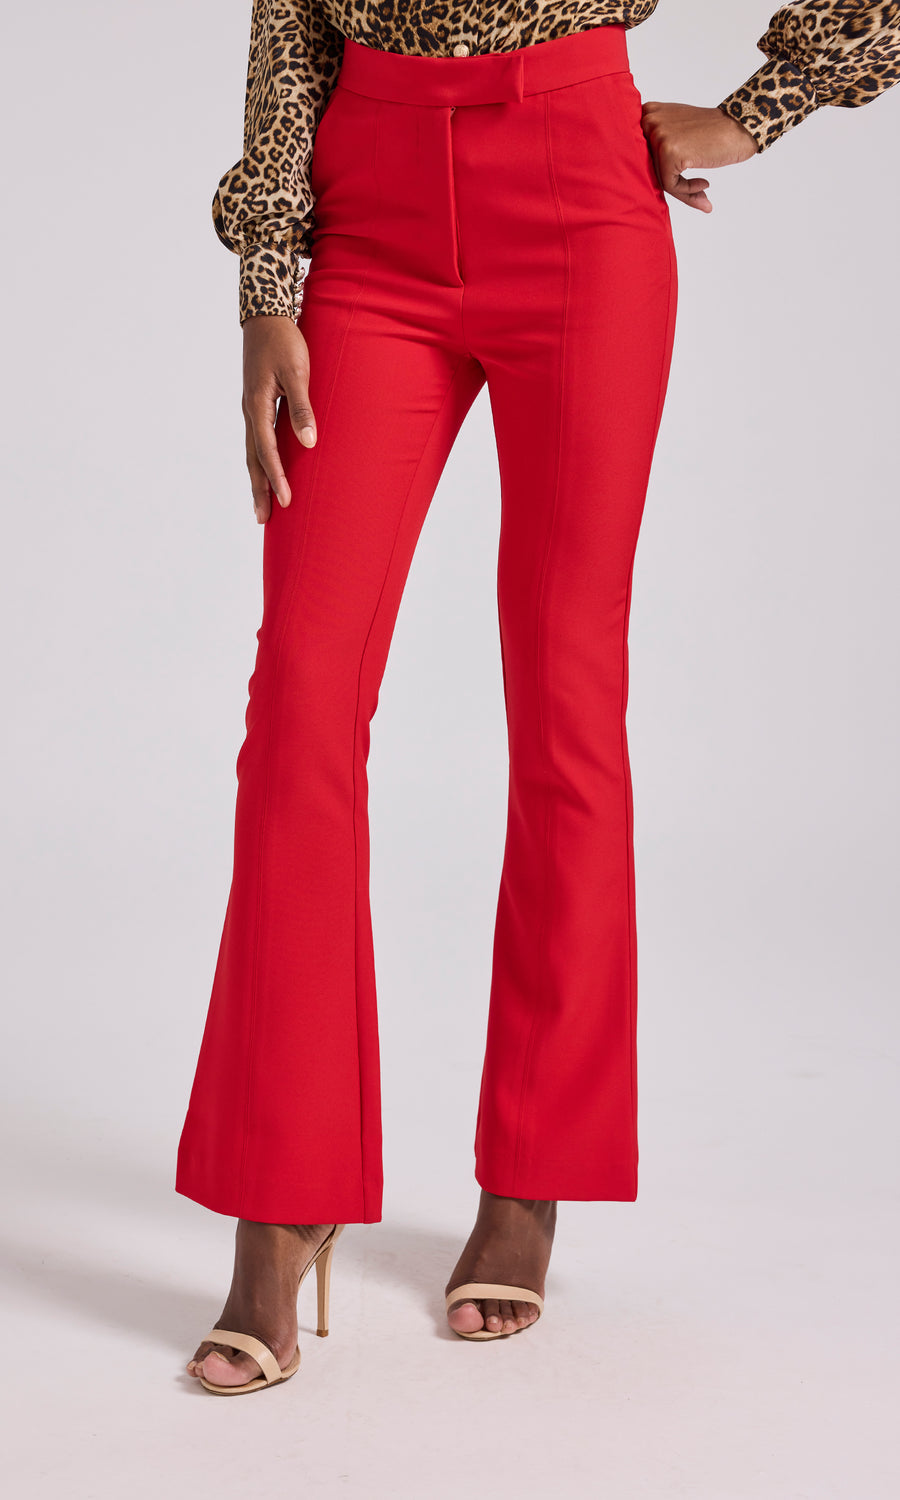 Lucca Crepe Pants - Red